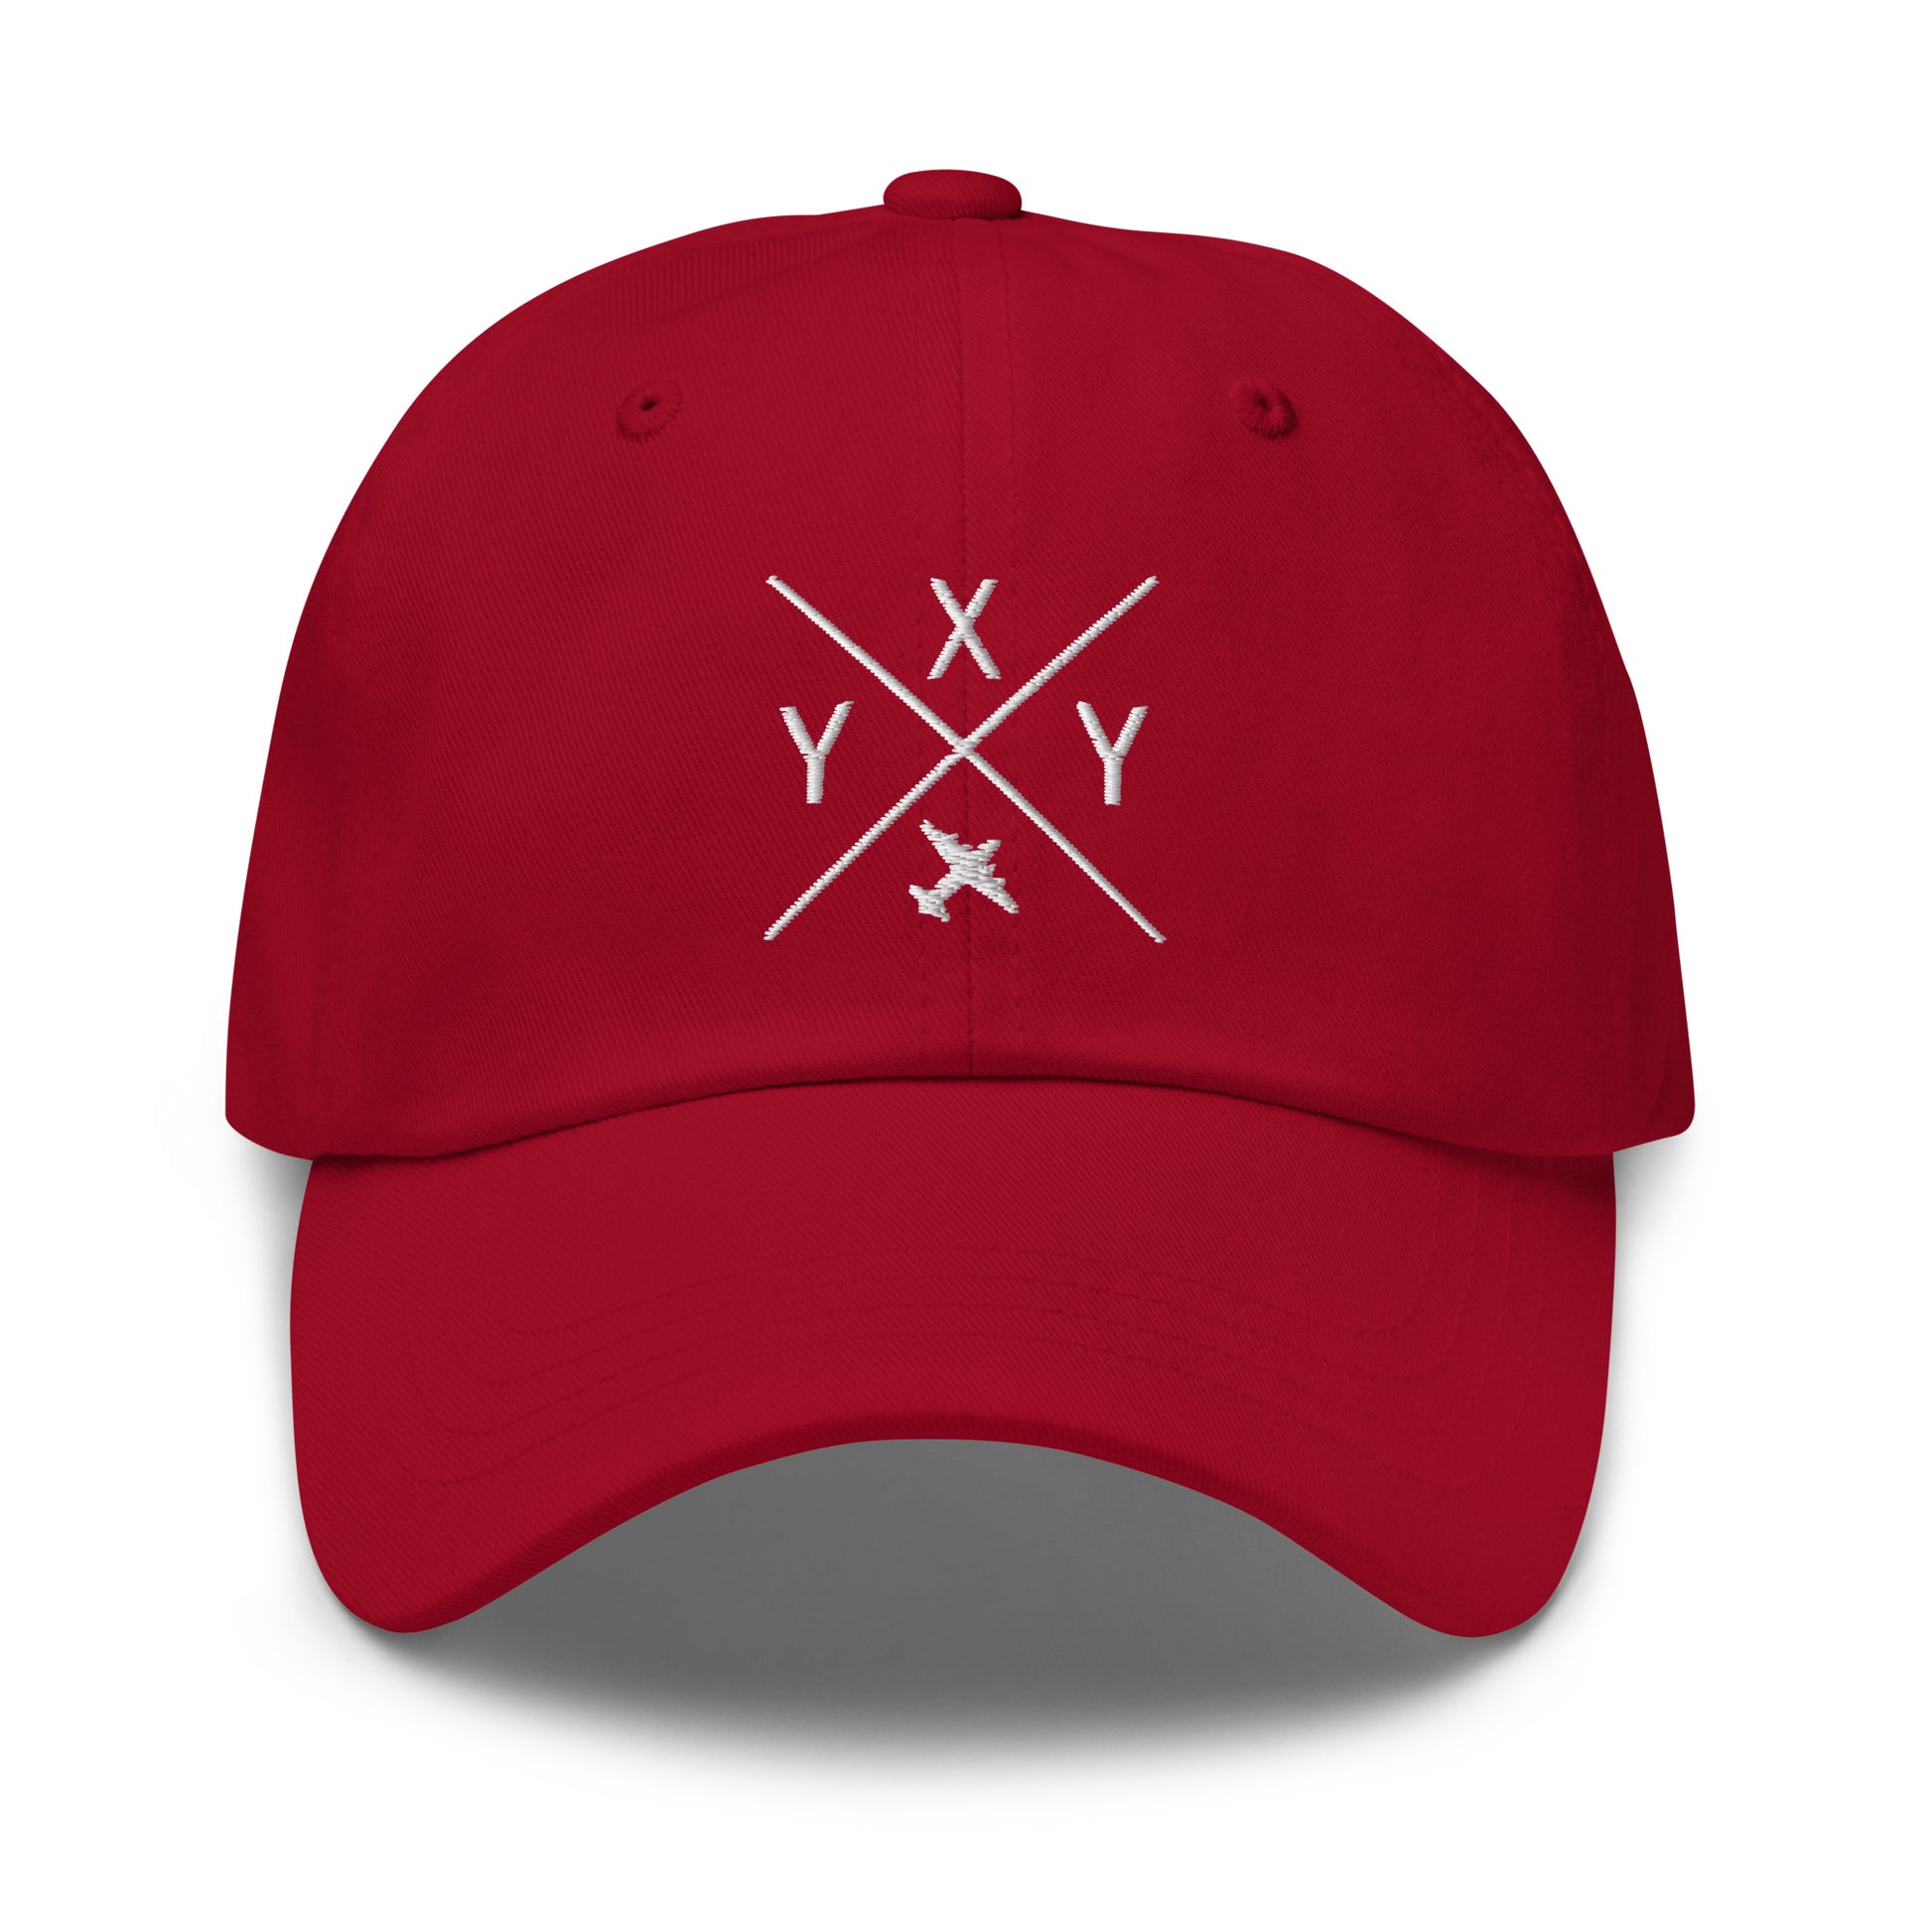 Crossed-X Dad Hat - White • YXY Whitehorse • YHM Designs - Image 13